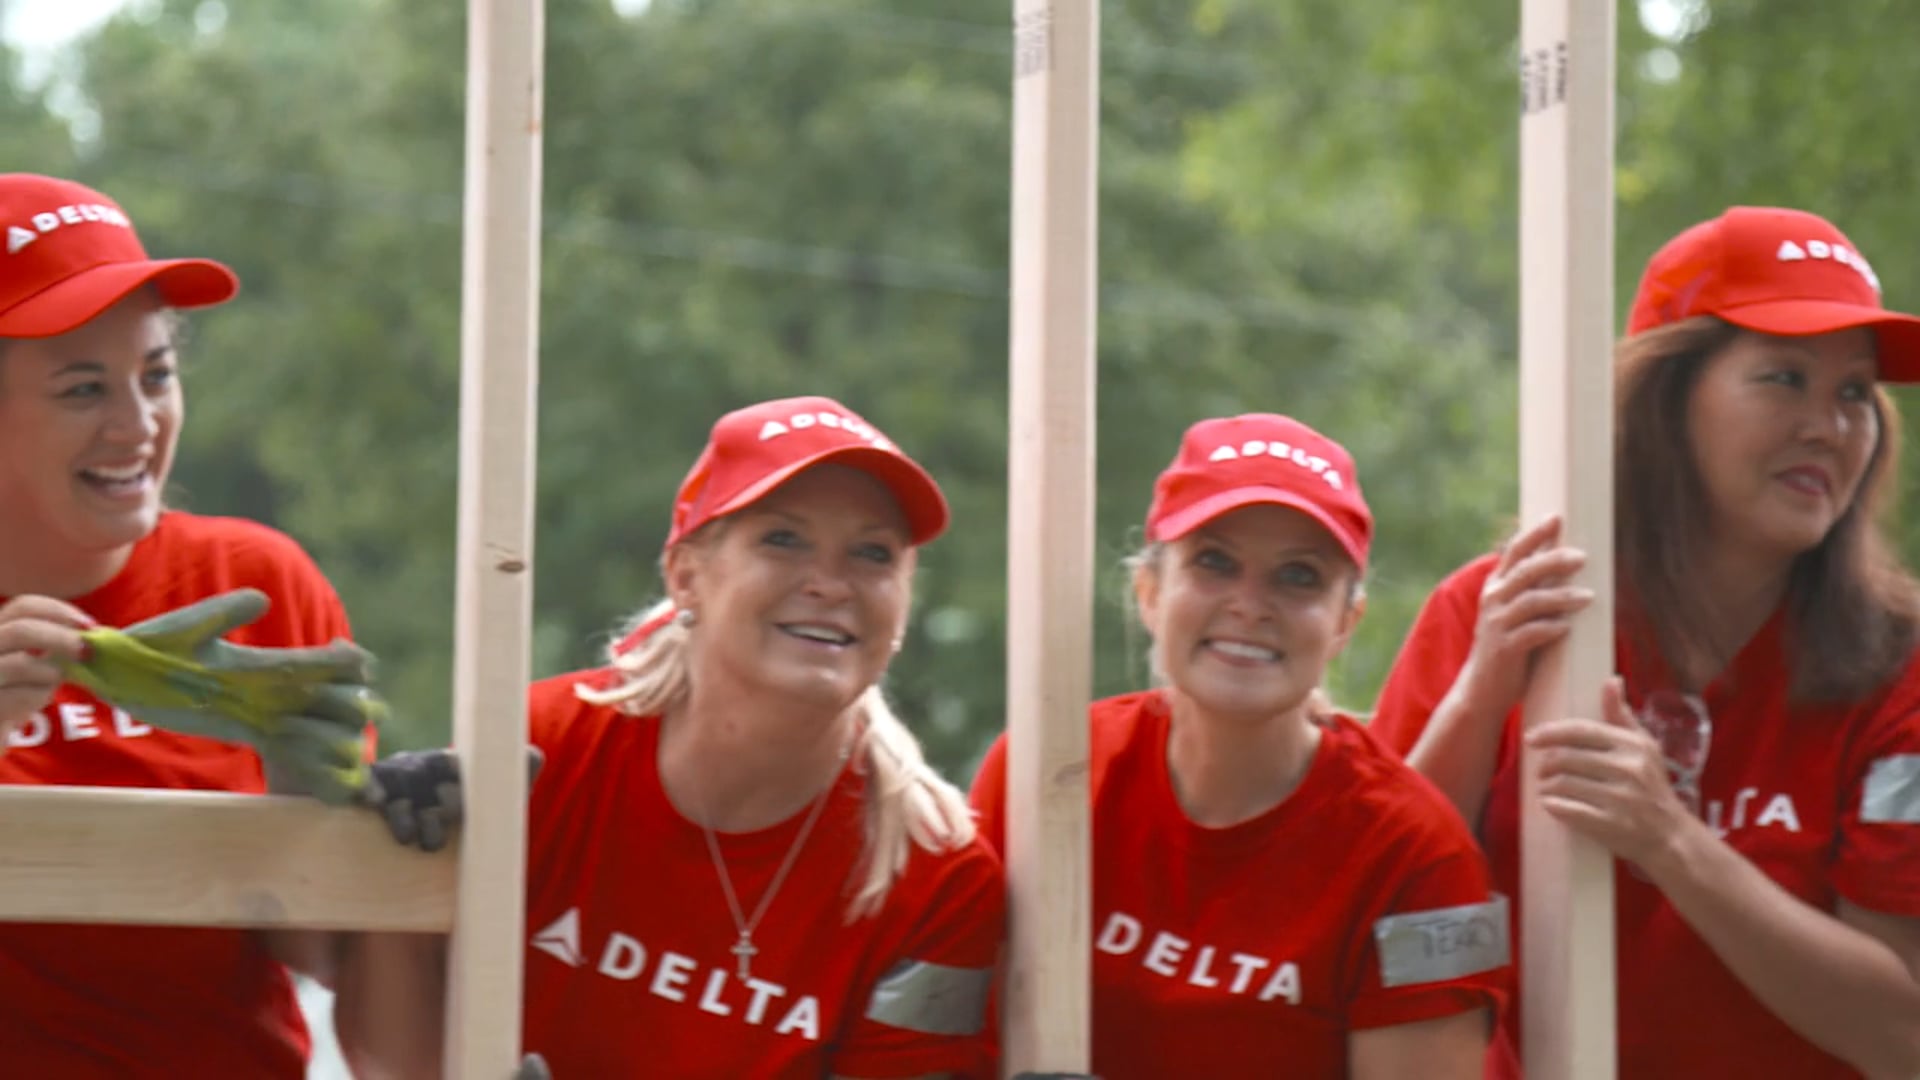 Delta: Habitat for Humanity - Kim (2015) Directed and lensed by Jose A. Acosta for Heards Creek.